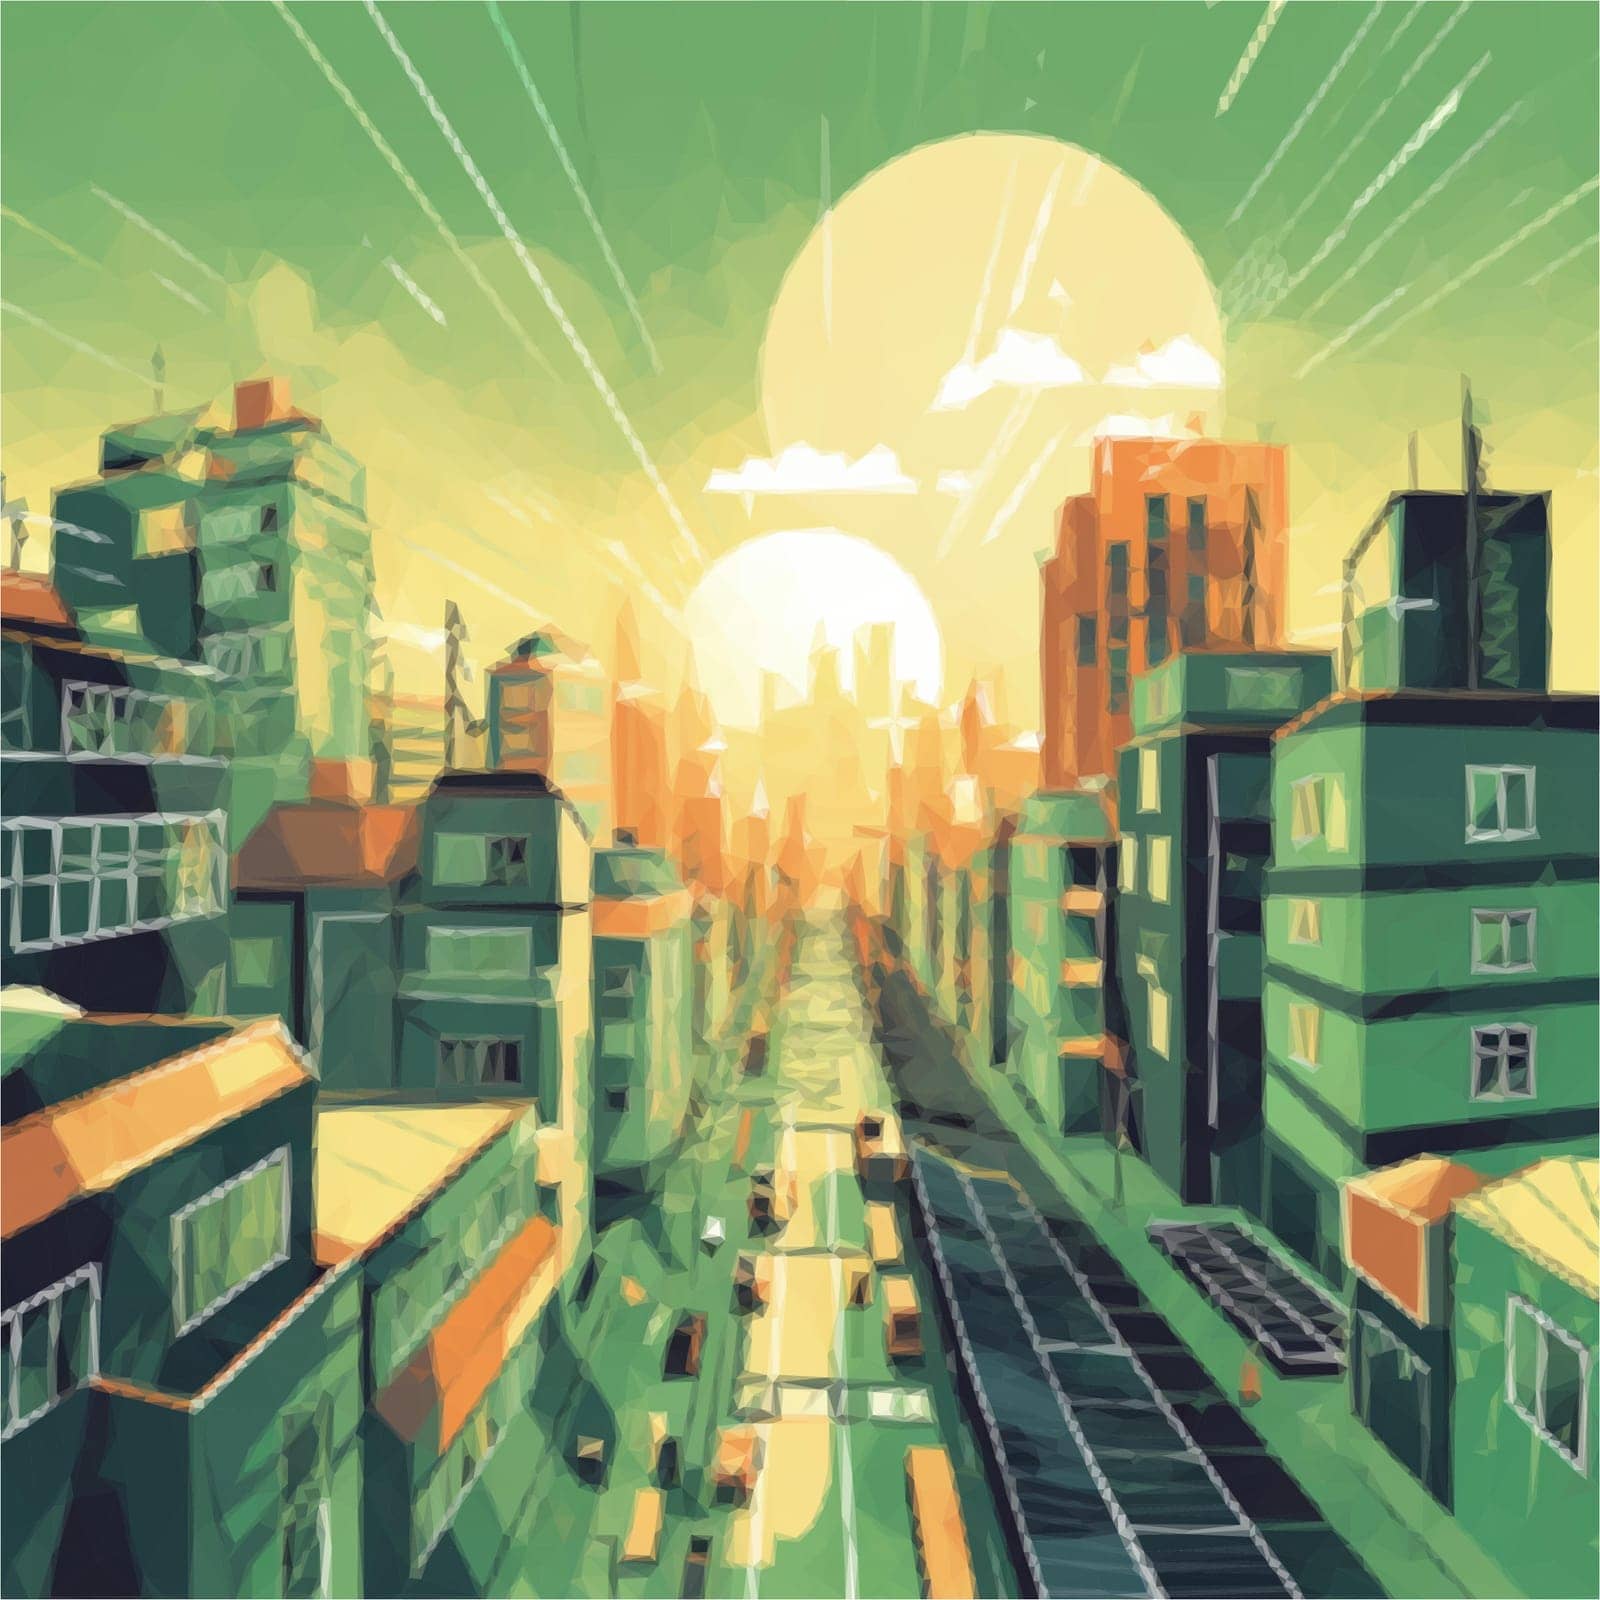 Abstract image of a new bright metropolis city. Vector illustration